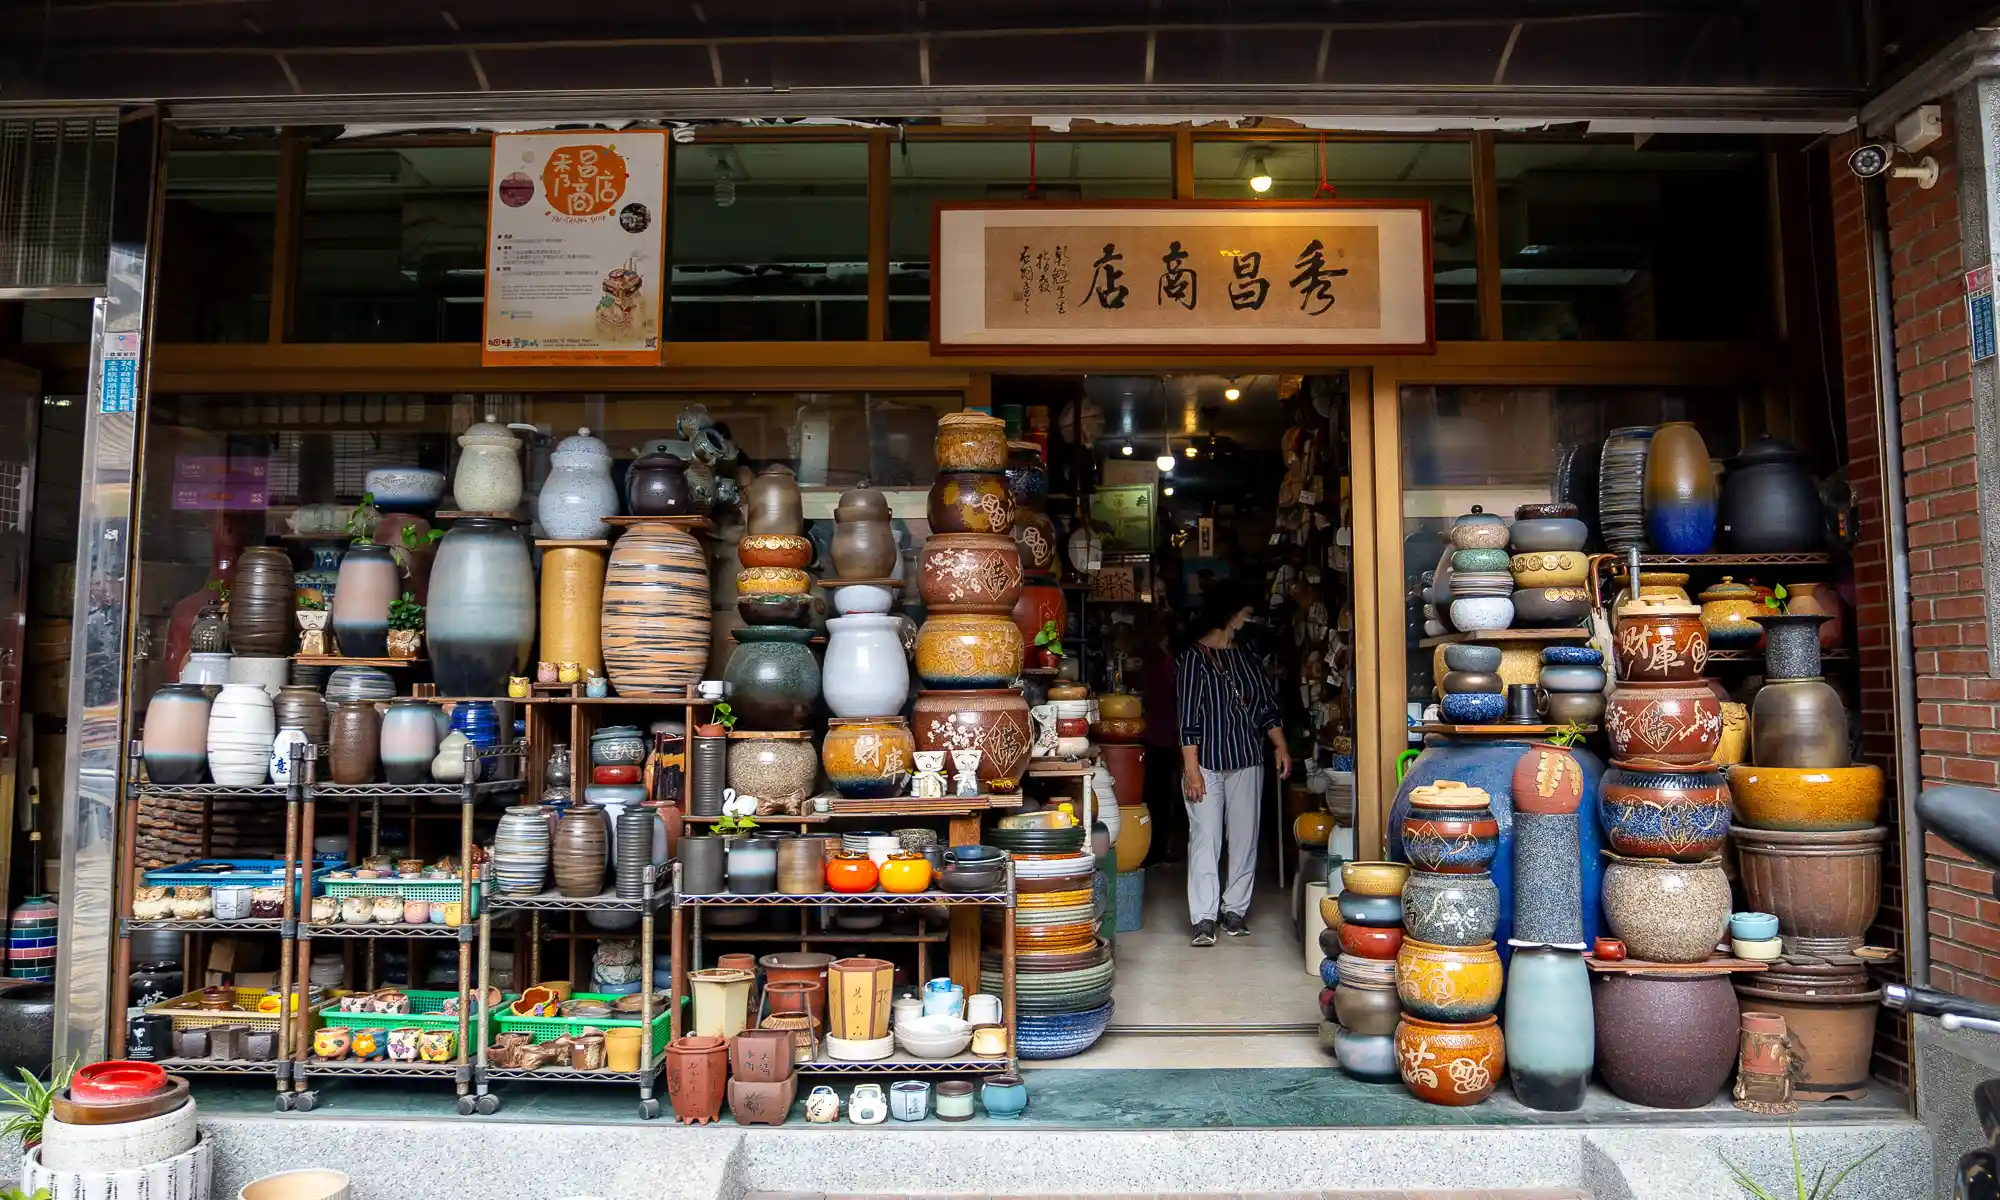 A storefront on Yingge Old Street has ceramics stacked almost to the ceiling on display in front of the store.